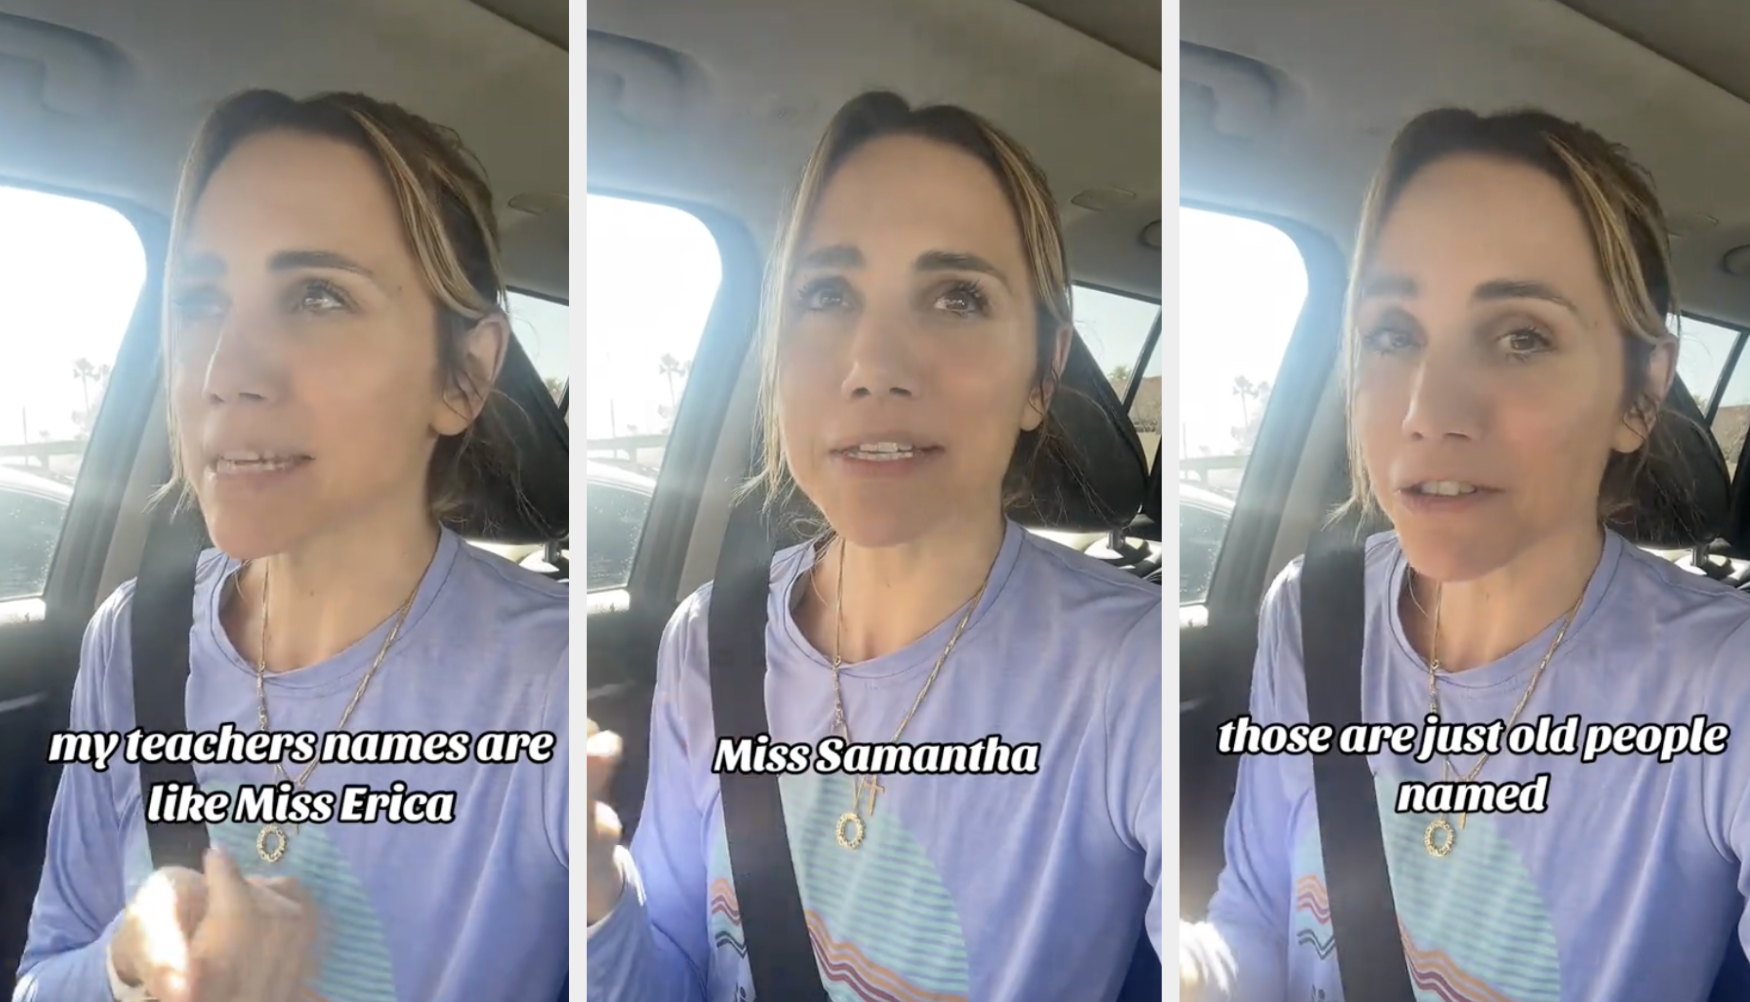 Three frames of Amber talking in a car with captions discussing &quot;teachers names&quot; and &quot;old people names&quot;